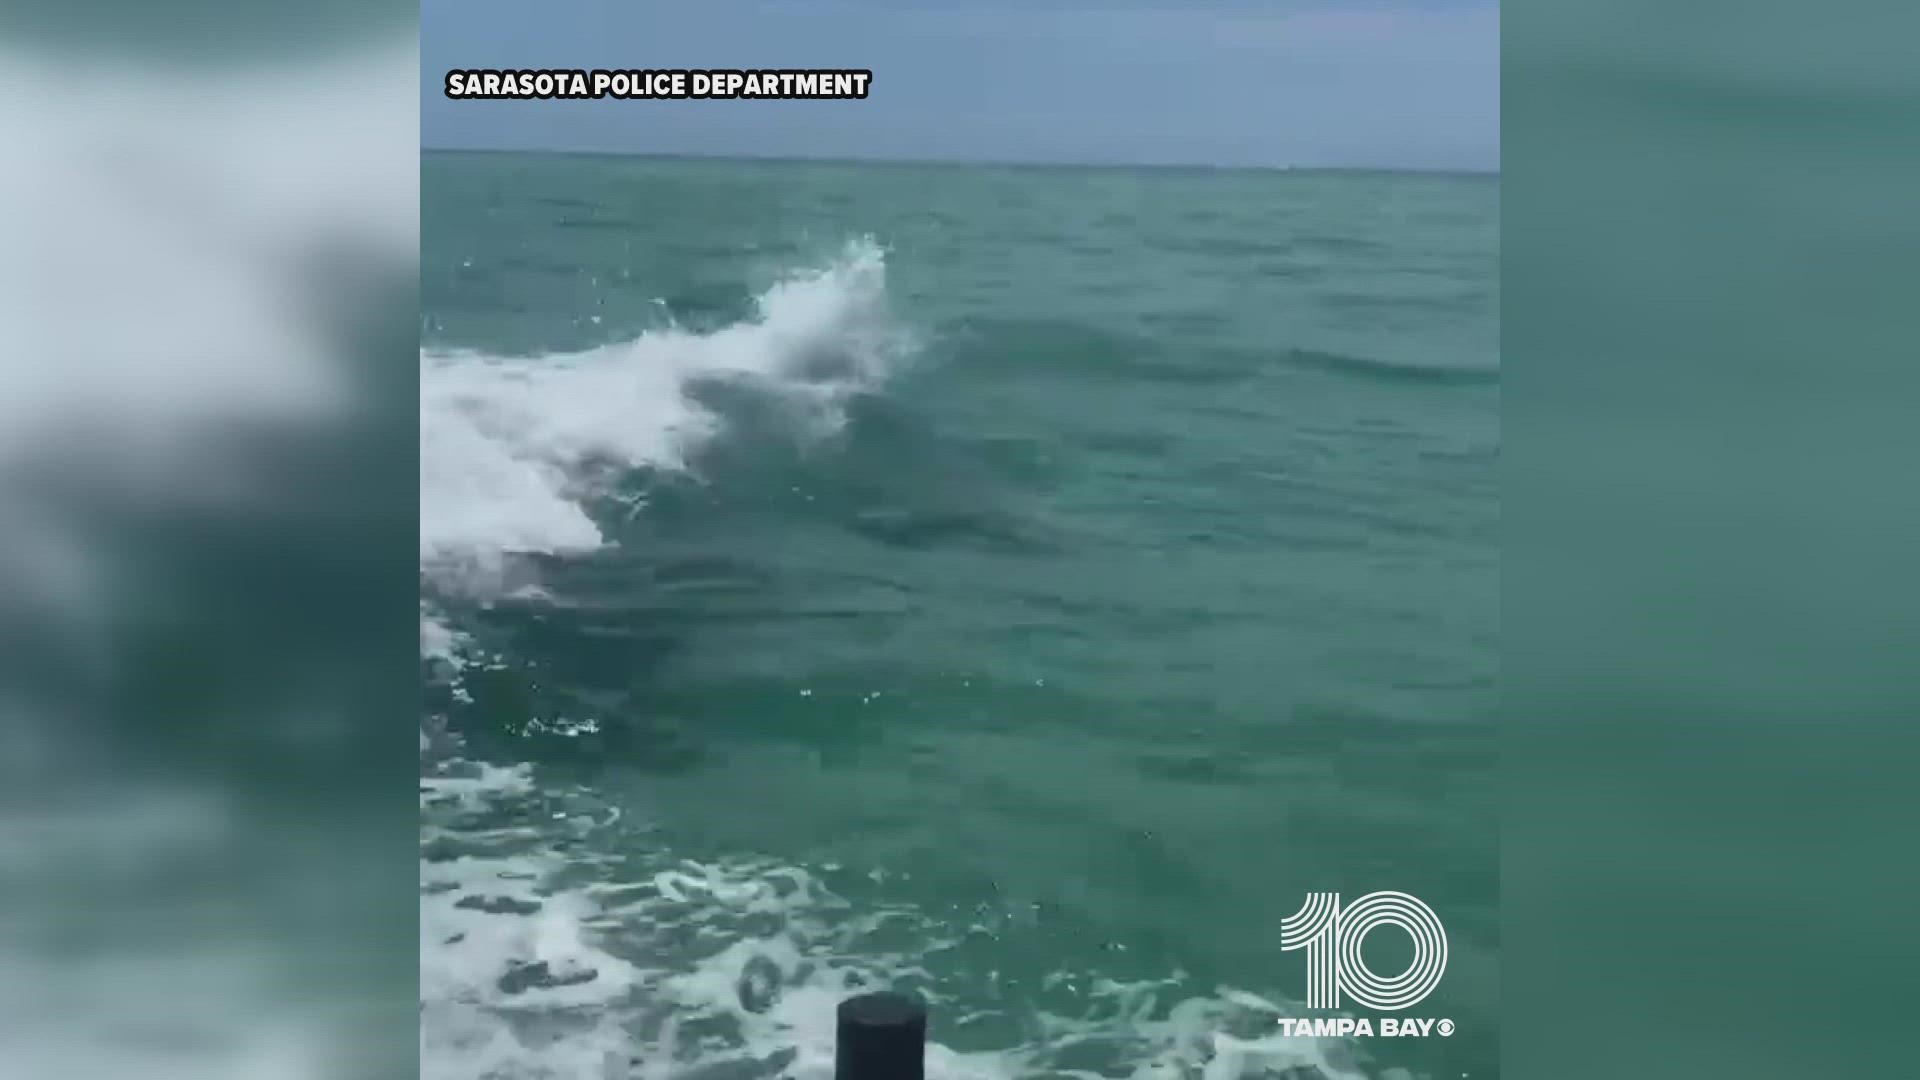 The video was captured near North Lido as the boat headed into New Pass.